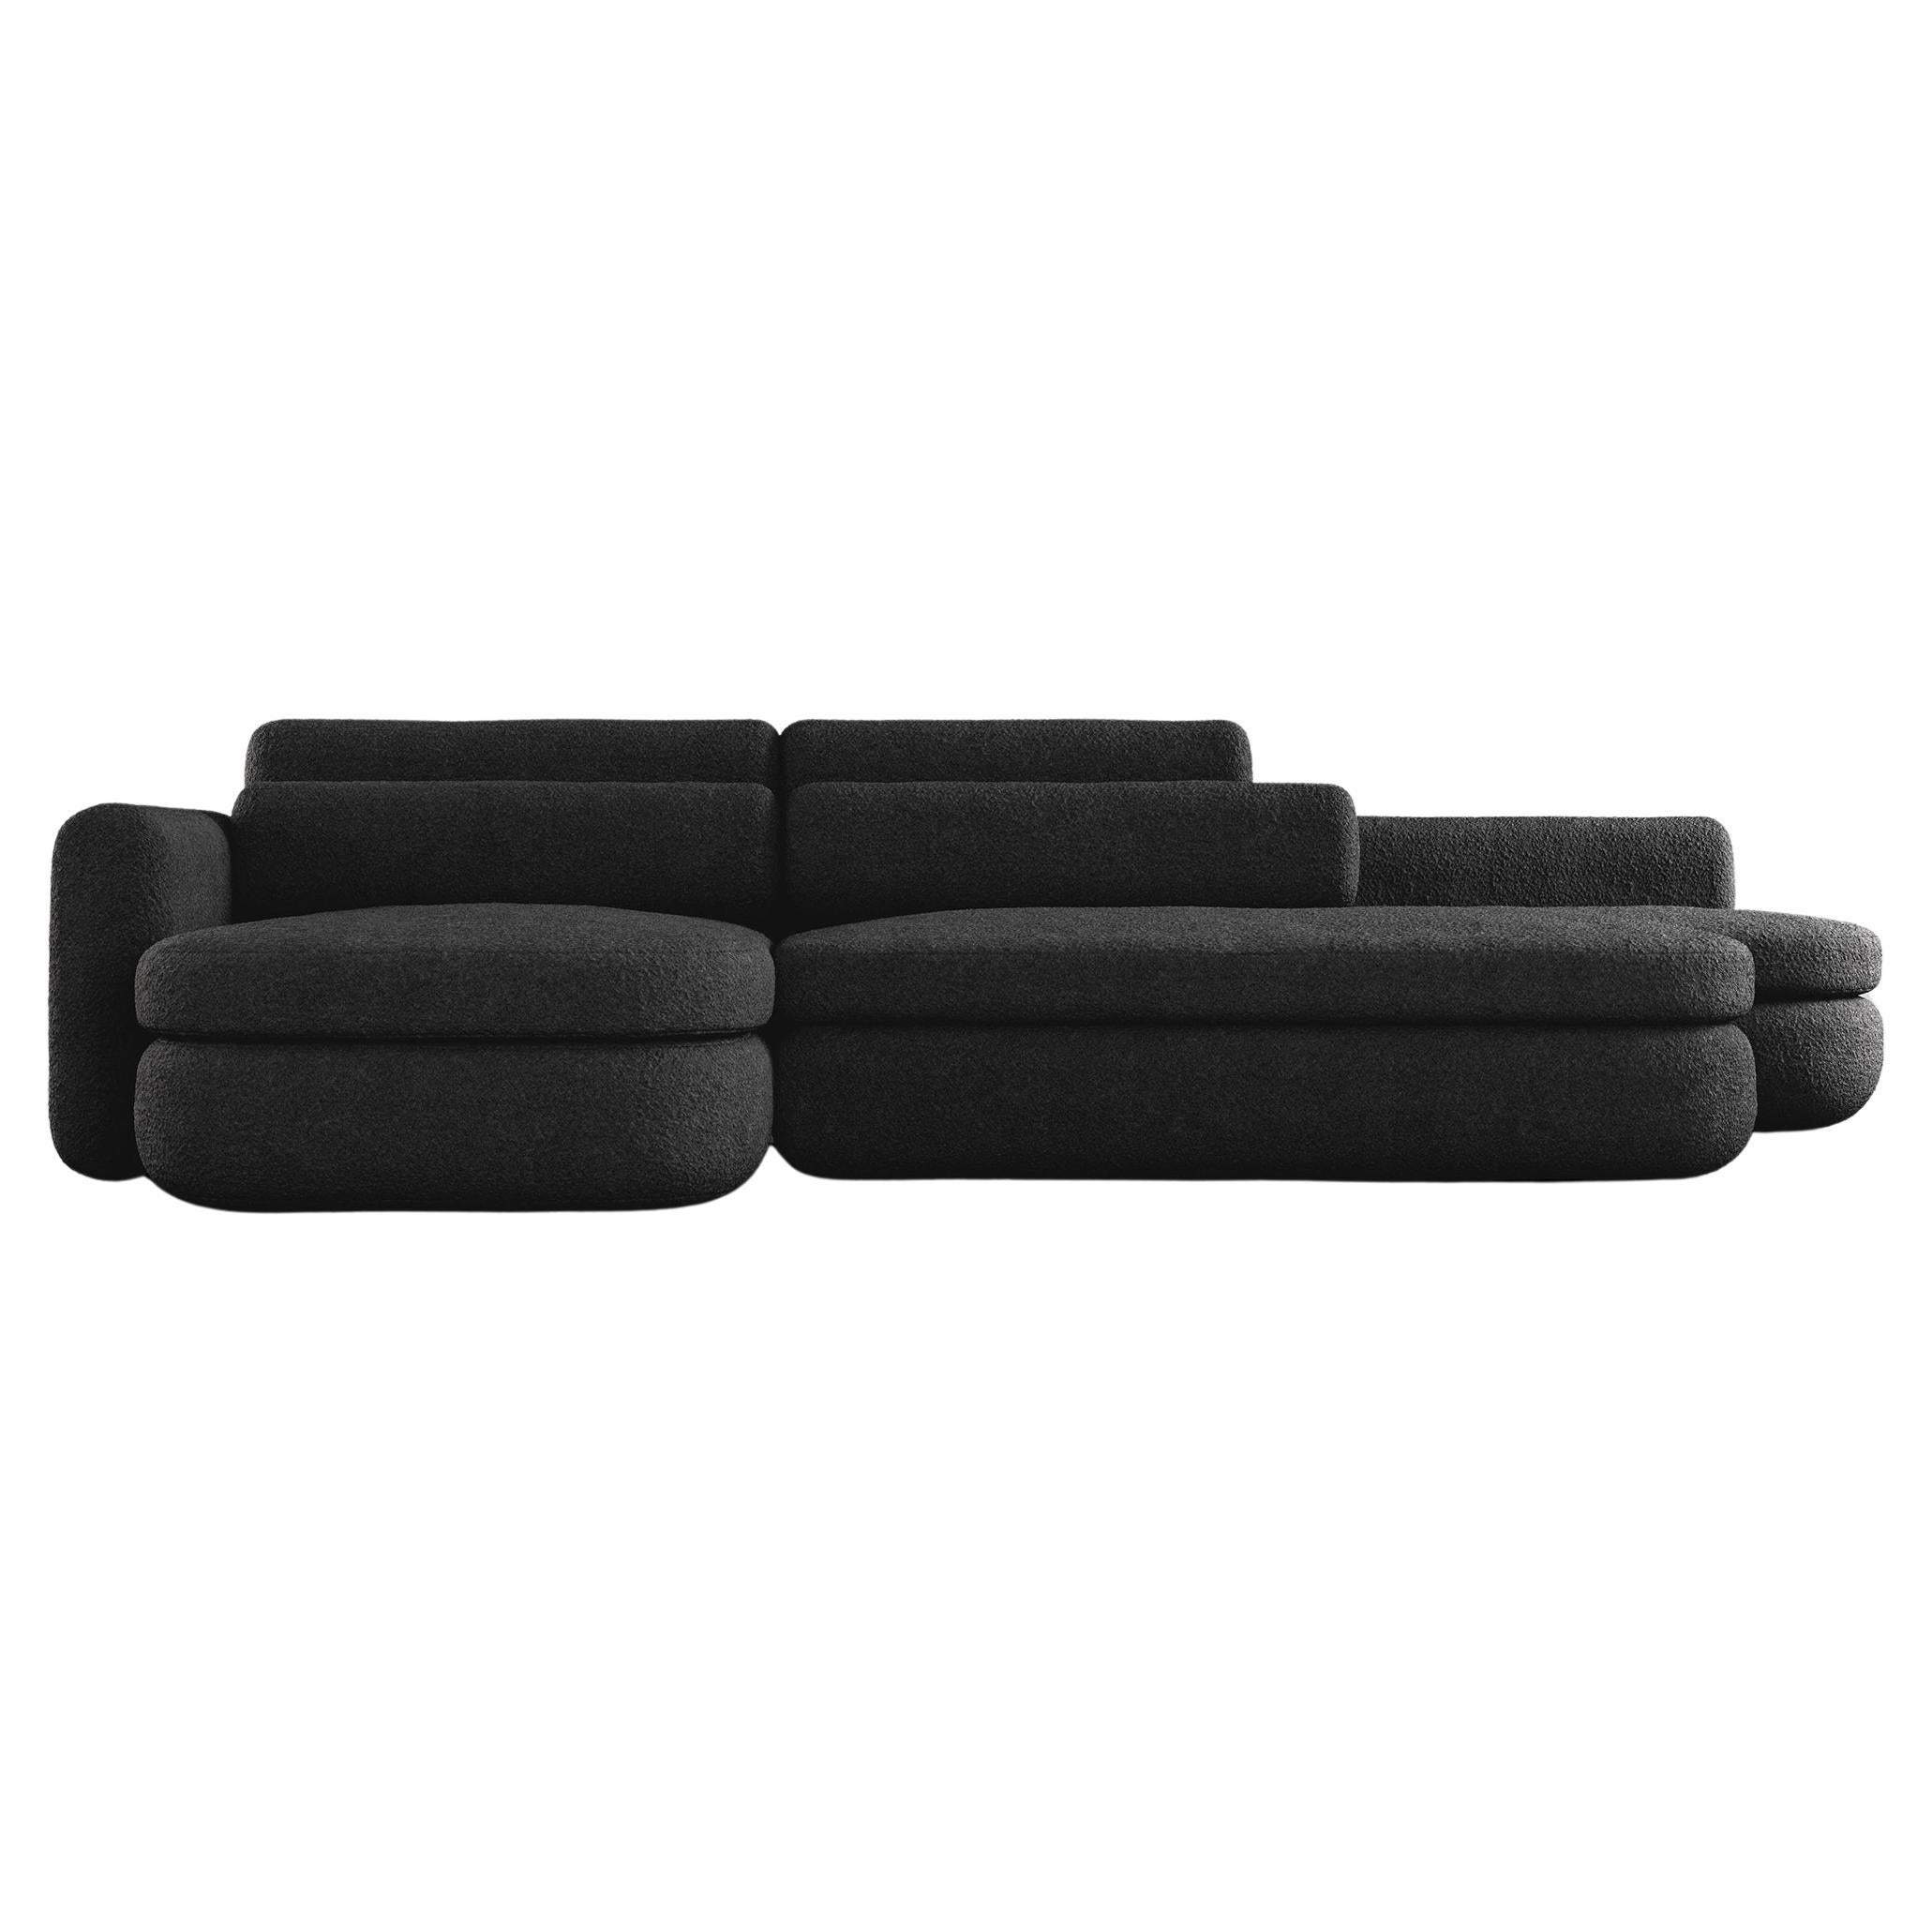 ASYM SECTIONAL - Modern Asymmetrical Sectional Sofa in Black Boucle For Sale